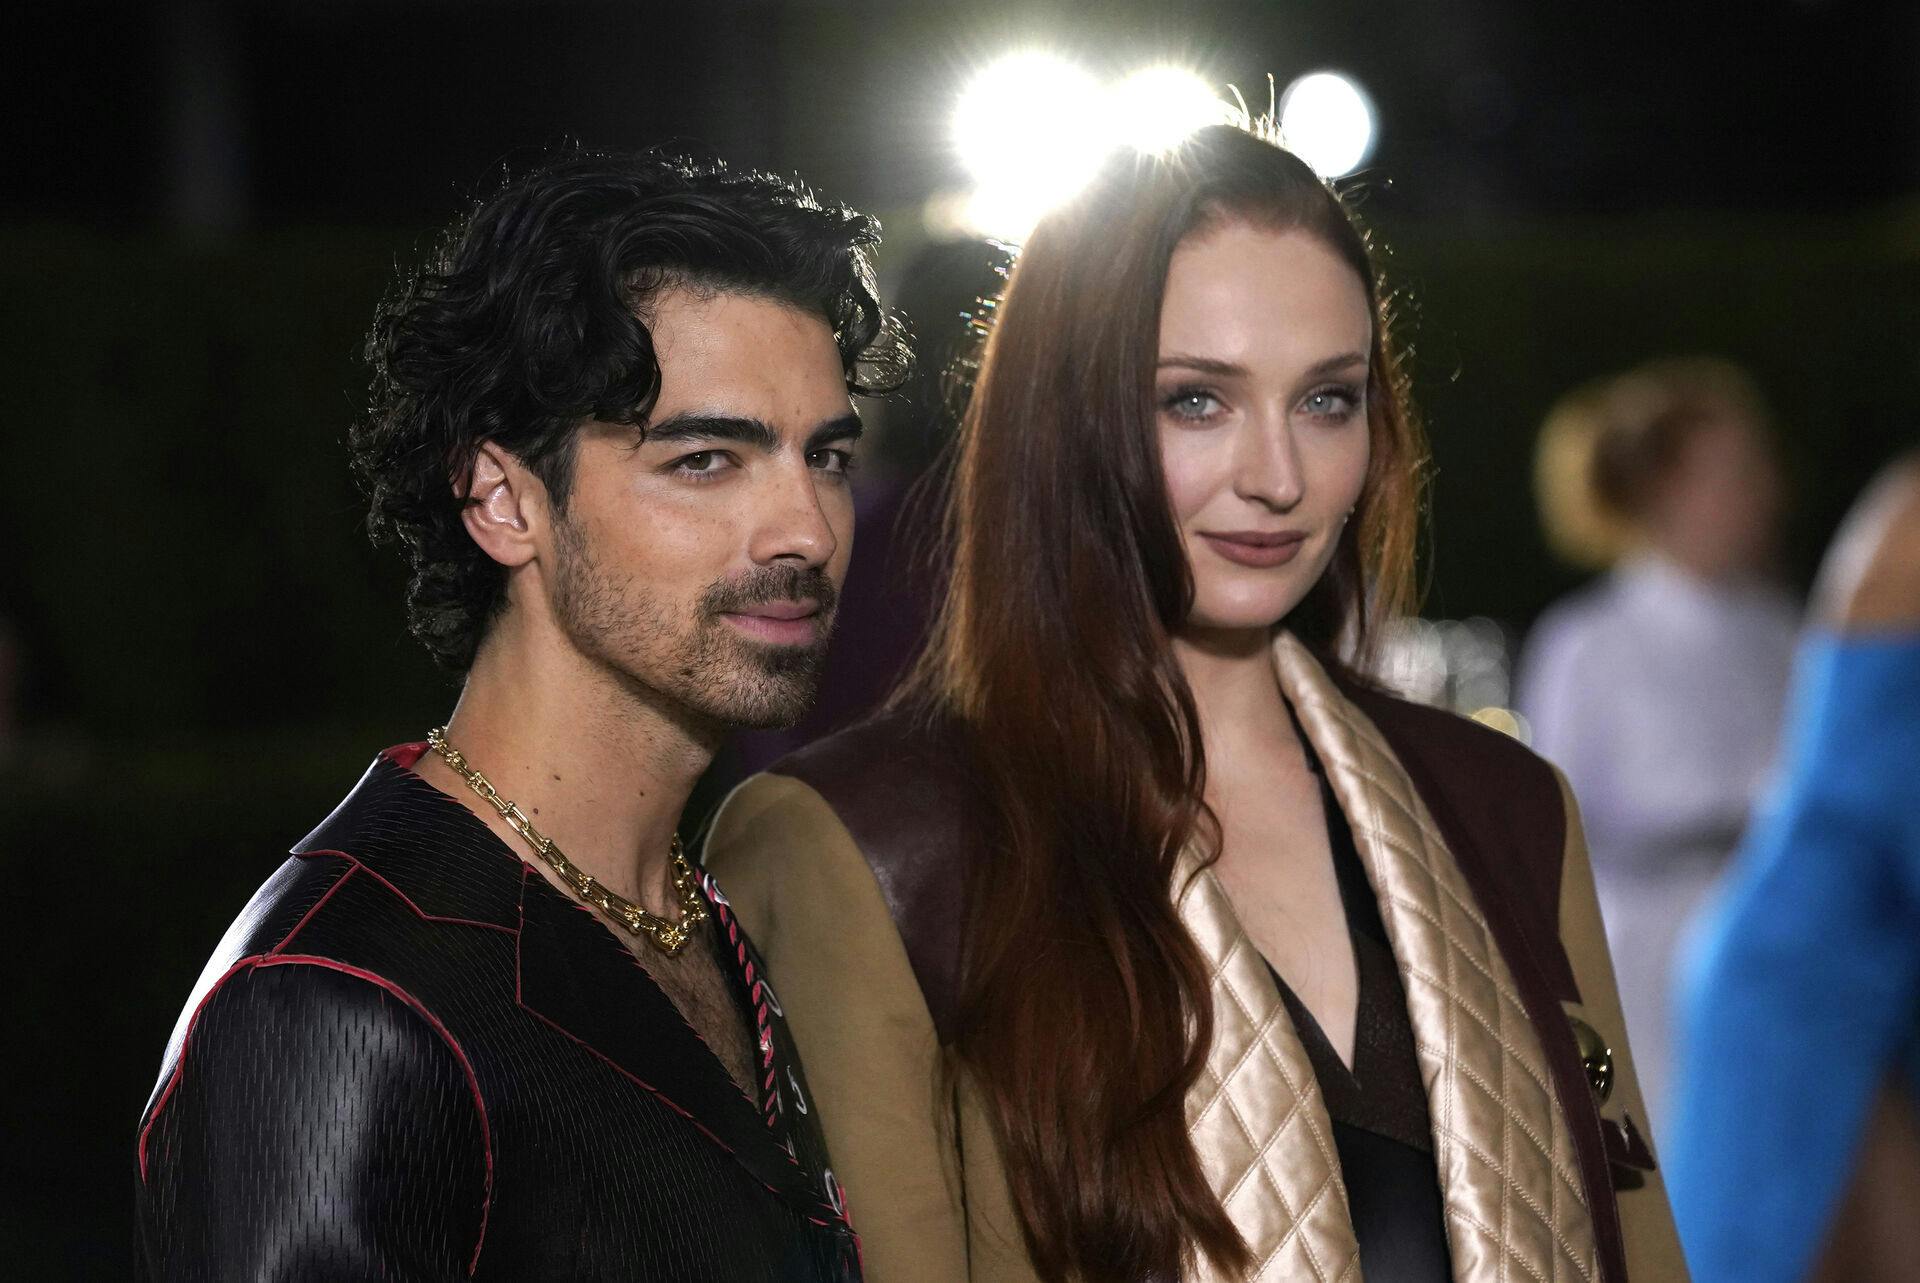 Joe Jonas, left and Sophie Turner arrive at the second annual Academy Museum gala at the Academy Museum of Motion Pictures on Saturday, Oct. 15, 2022, in Los Angeles. (AP Photo/Chris Pizzello)